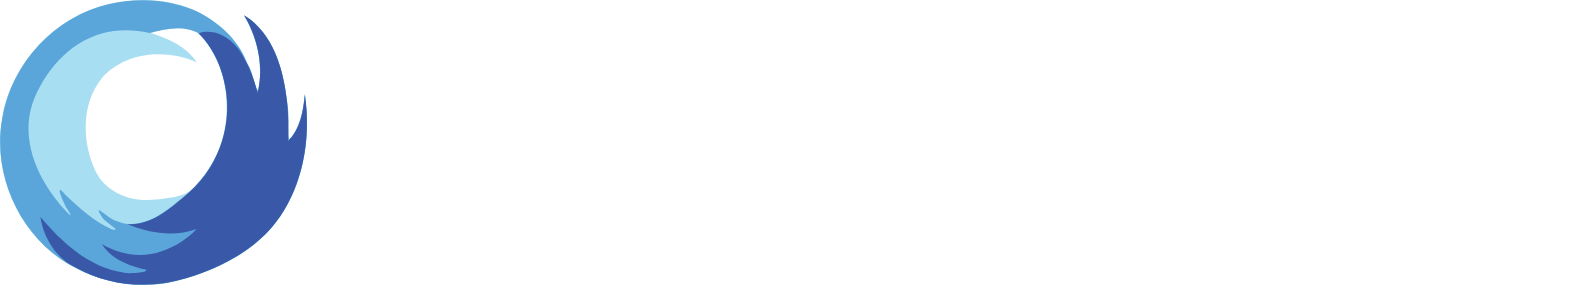 Pure Cycle (water) logo large for dark backgrounds (transparent PNG)